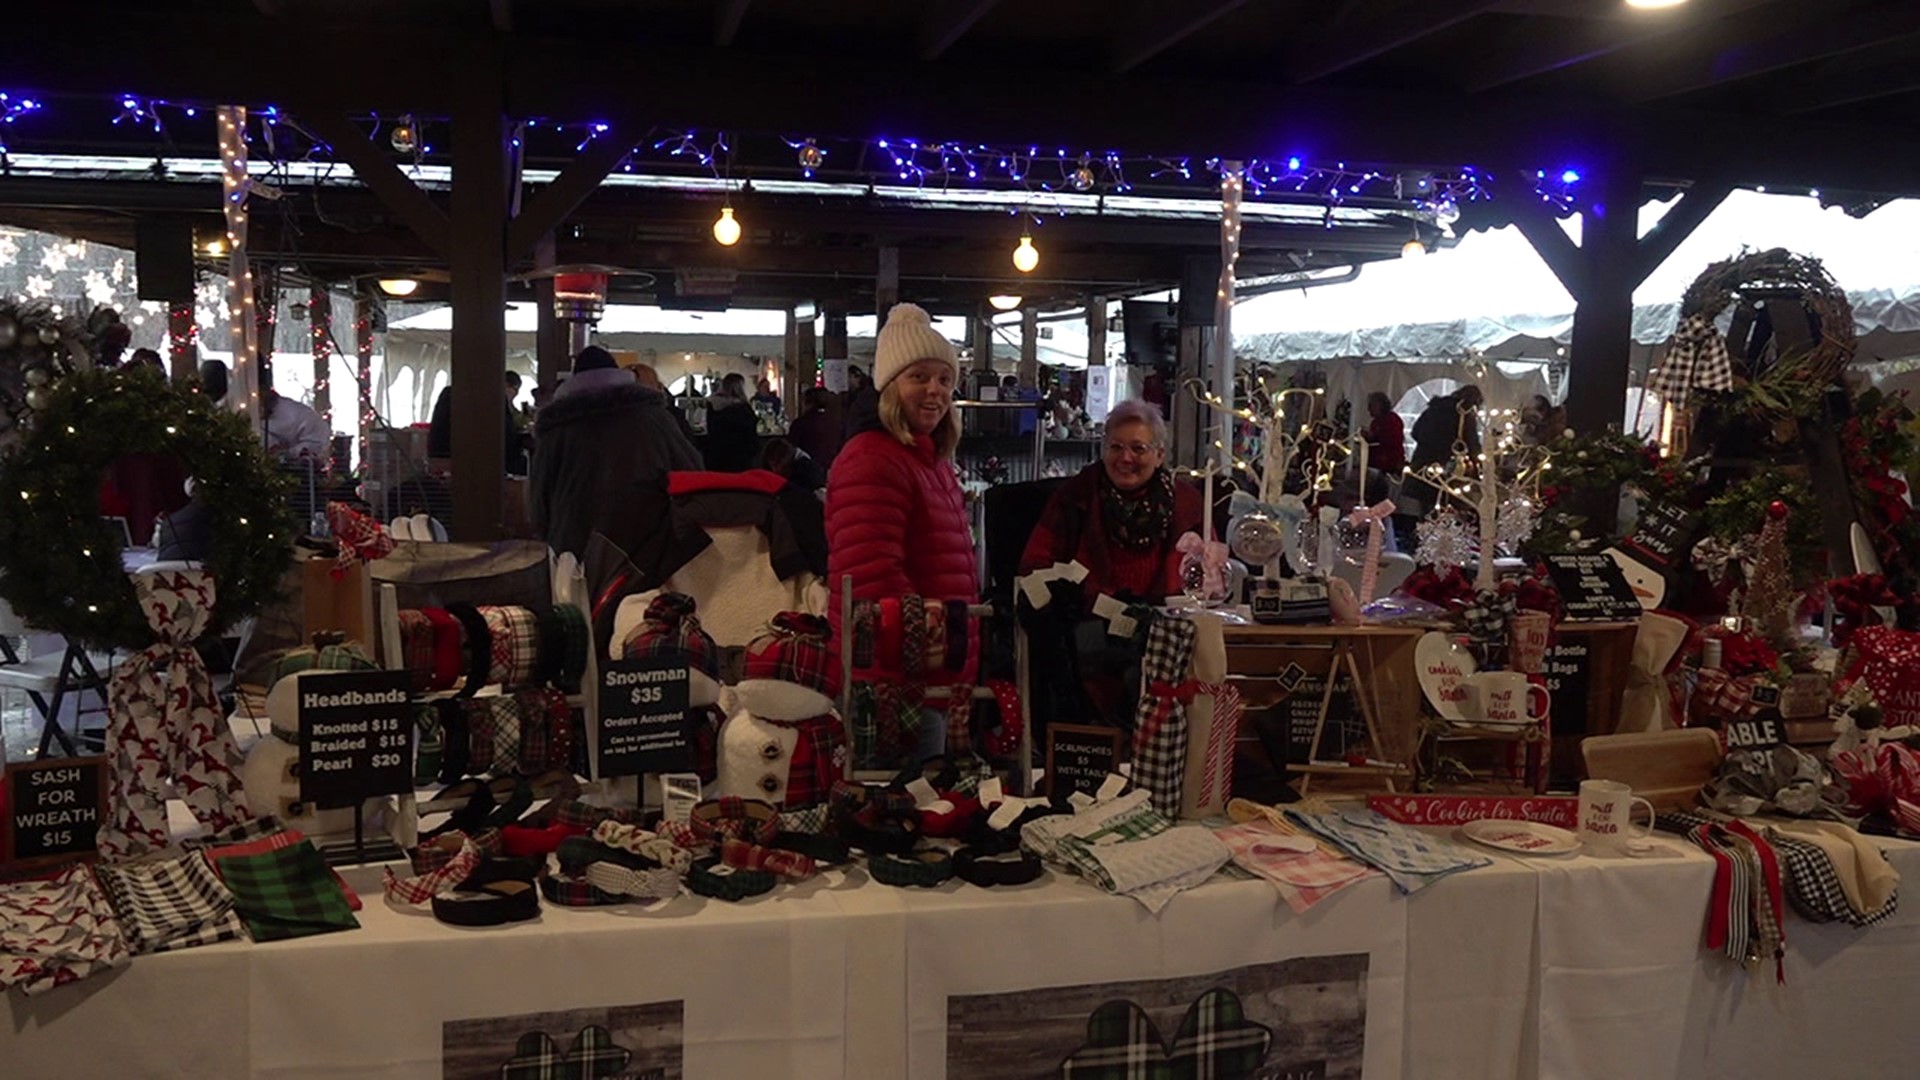 The holiday market was held at the Waldorf Park German American Federation in the city Sunday afternoon.